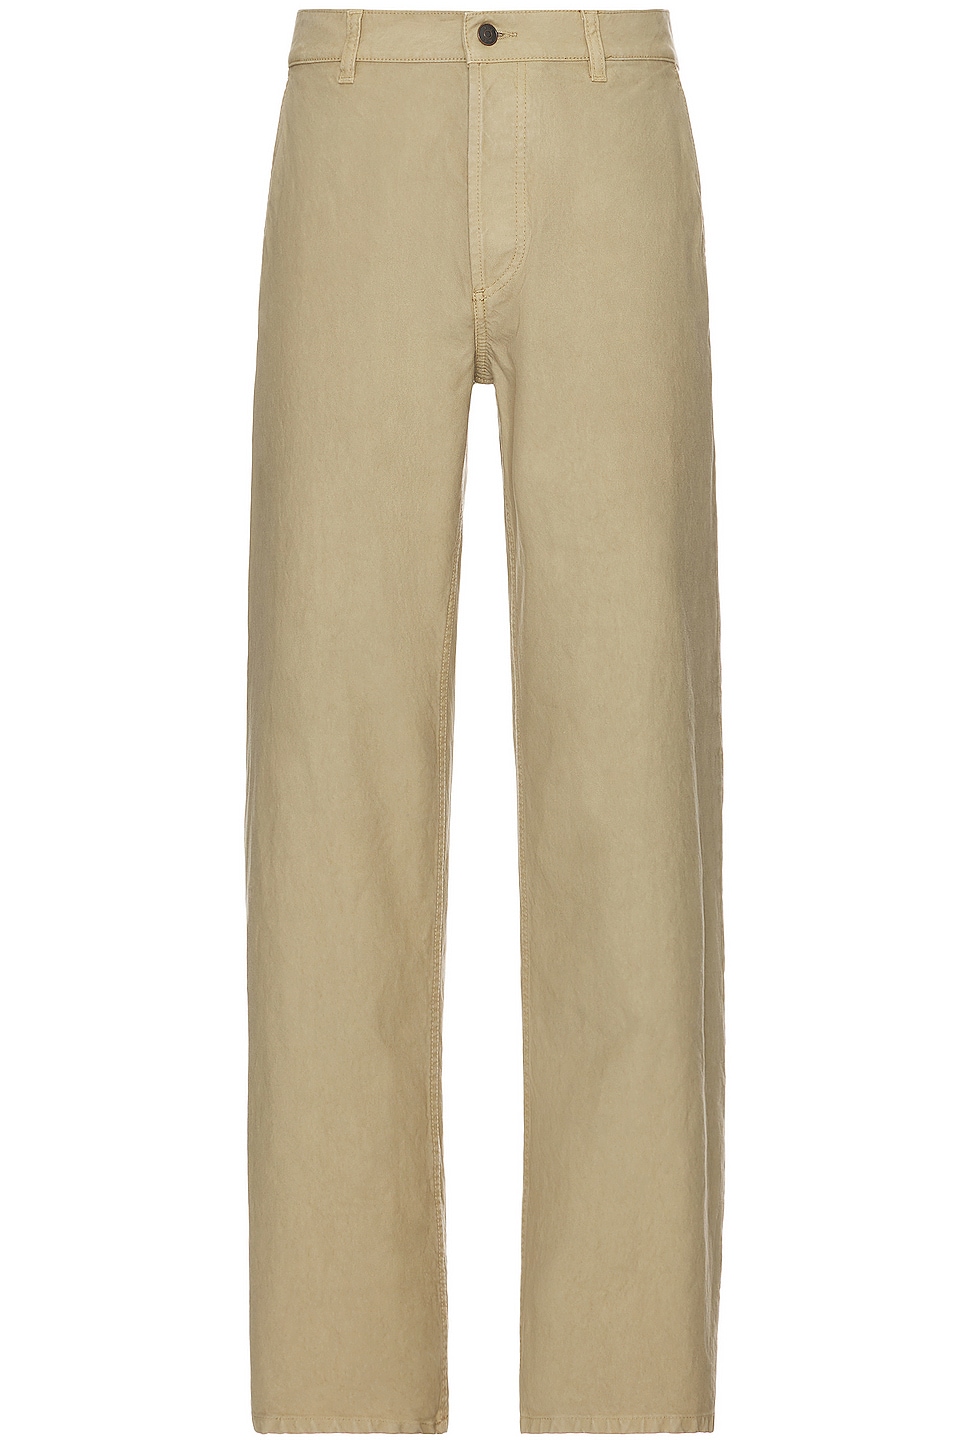 Image 1 of The Row Riggs Pant in Beige